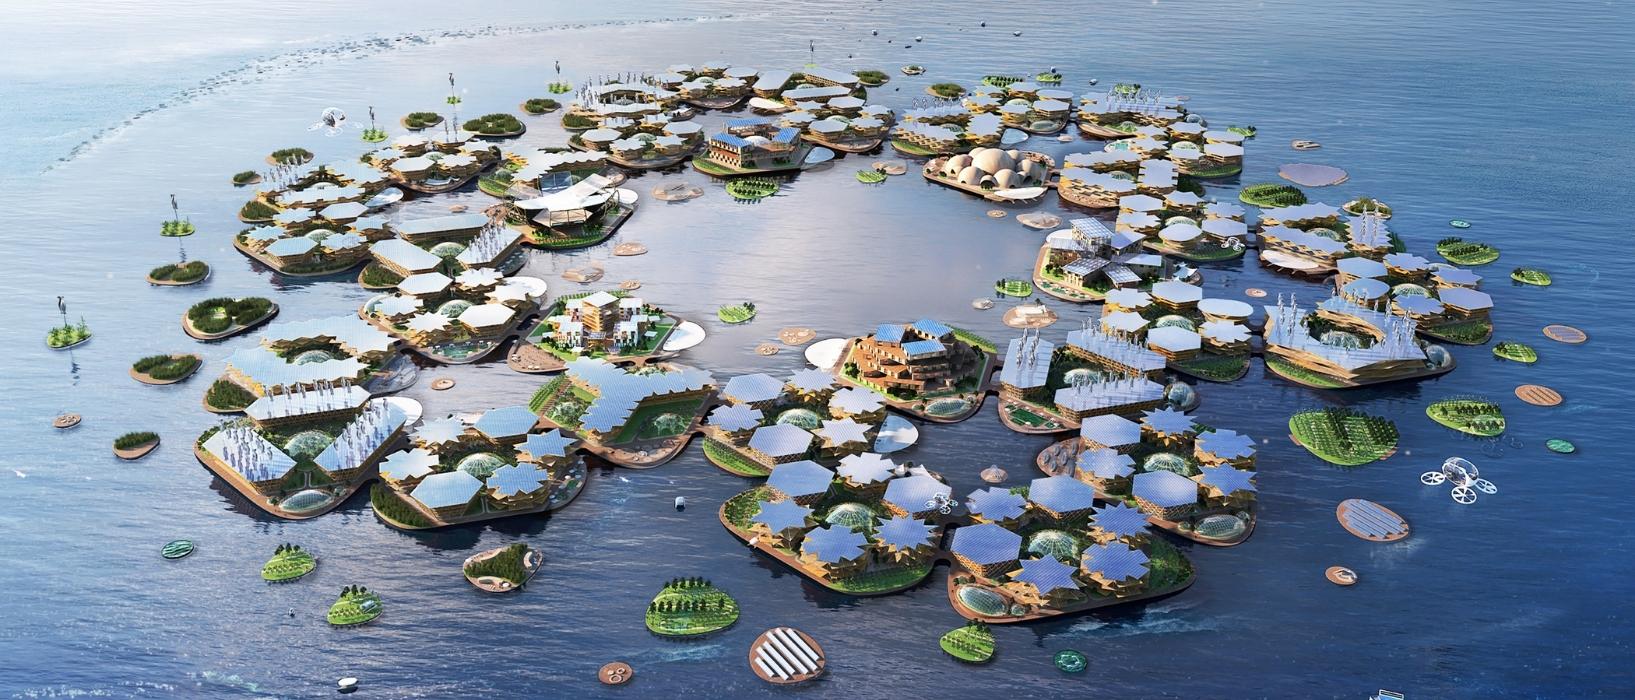 floating city on the ocean in small hexagonal modules, covered with solar panels